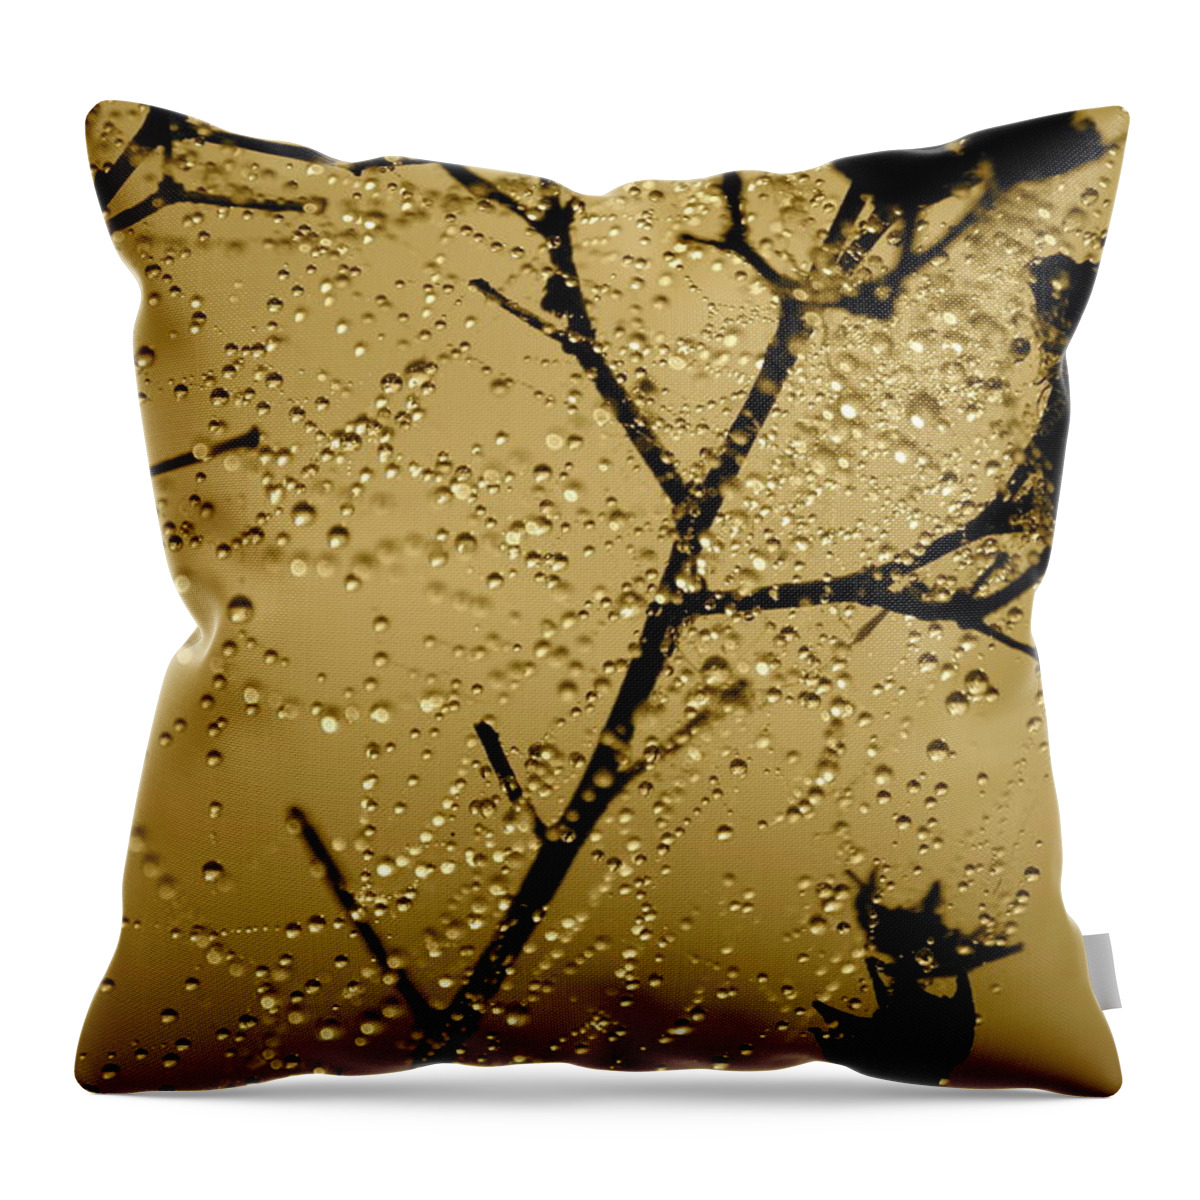 Dewdrops On Spider Web Throw Pillow featuring the photograph Sunrise Sparkle by Carol Groenen